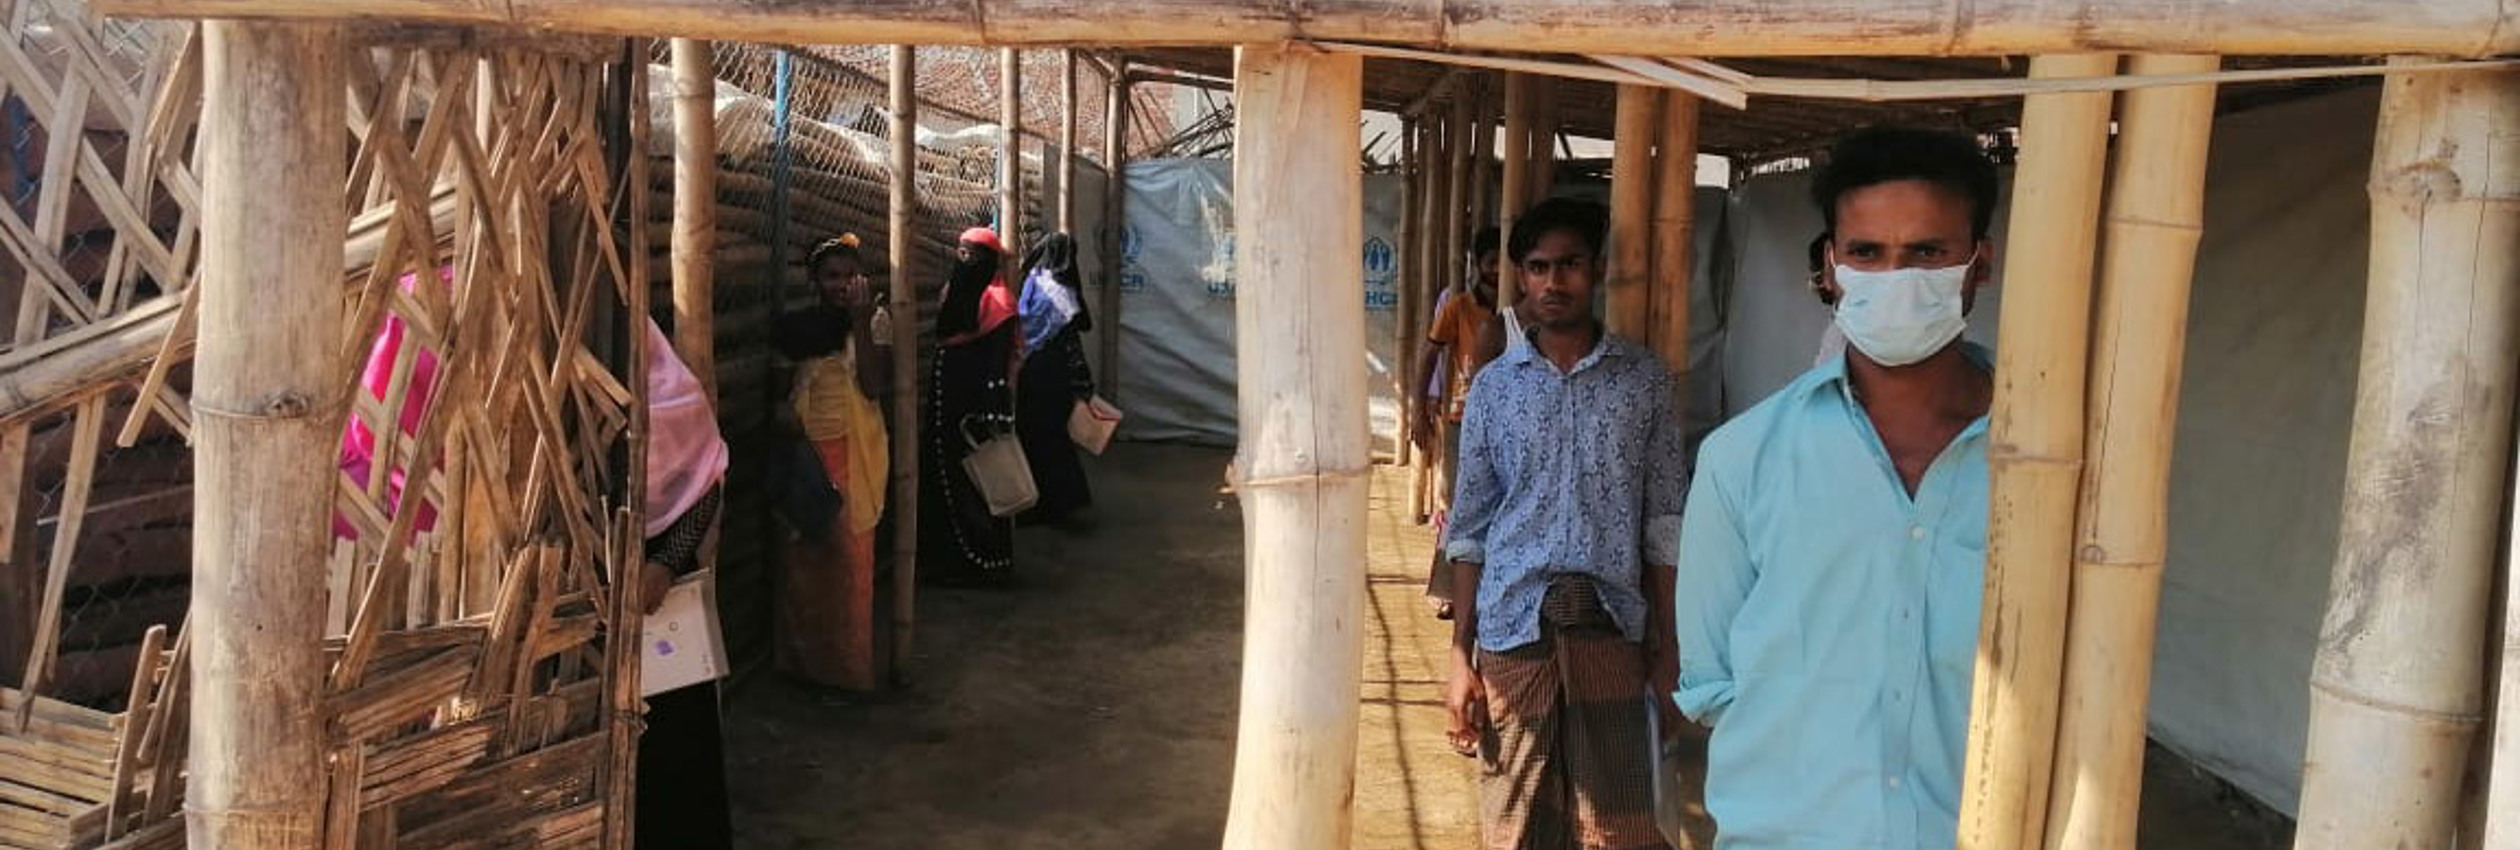 Social distancing in Kutupalong refugee camp in Bangladesh as first cases of COVID-19 detected